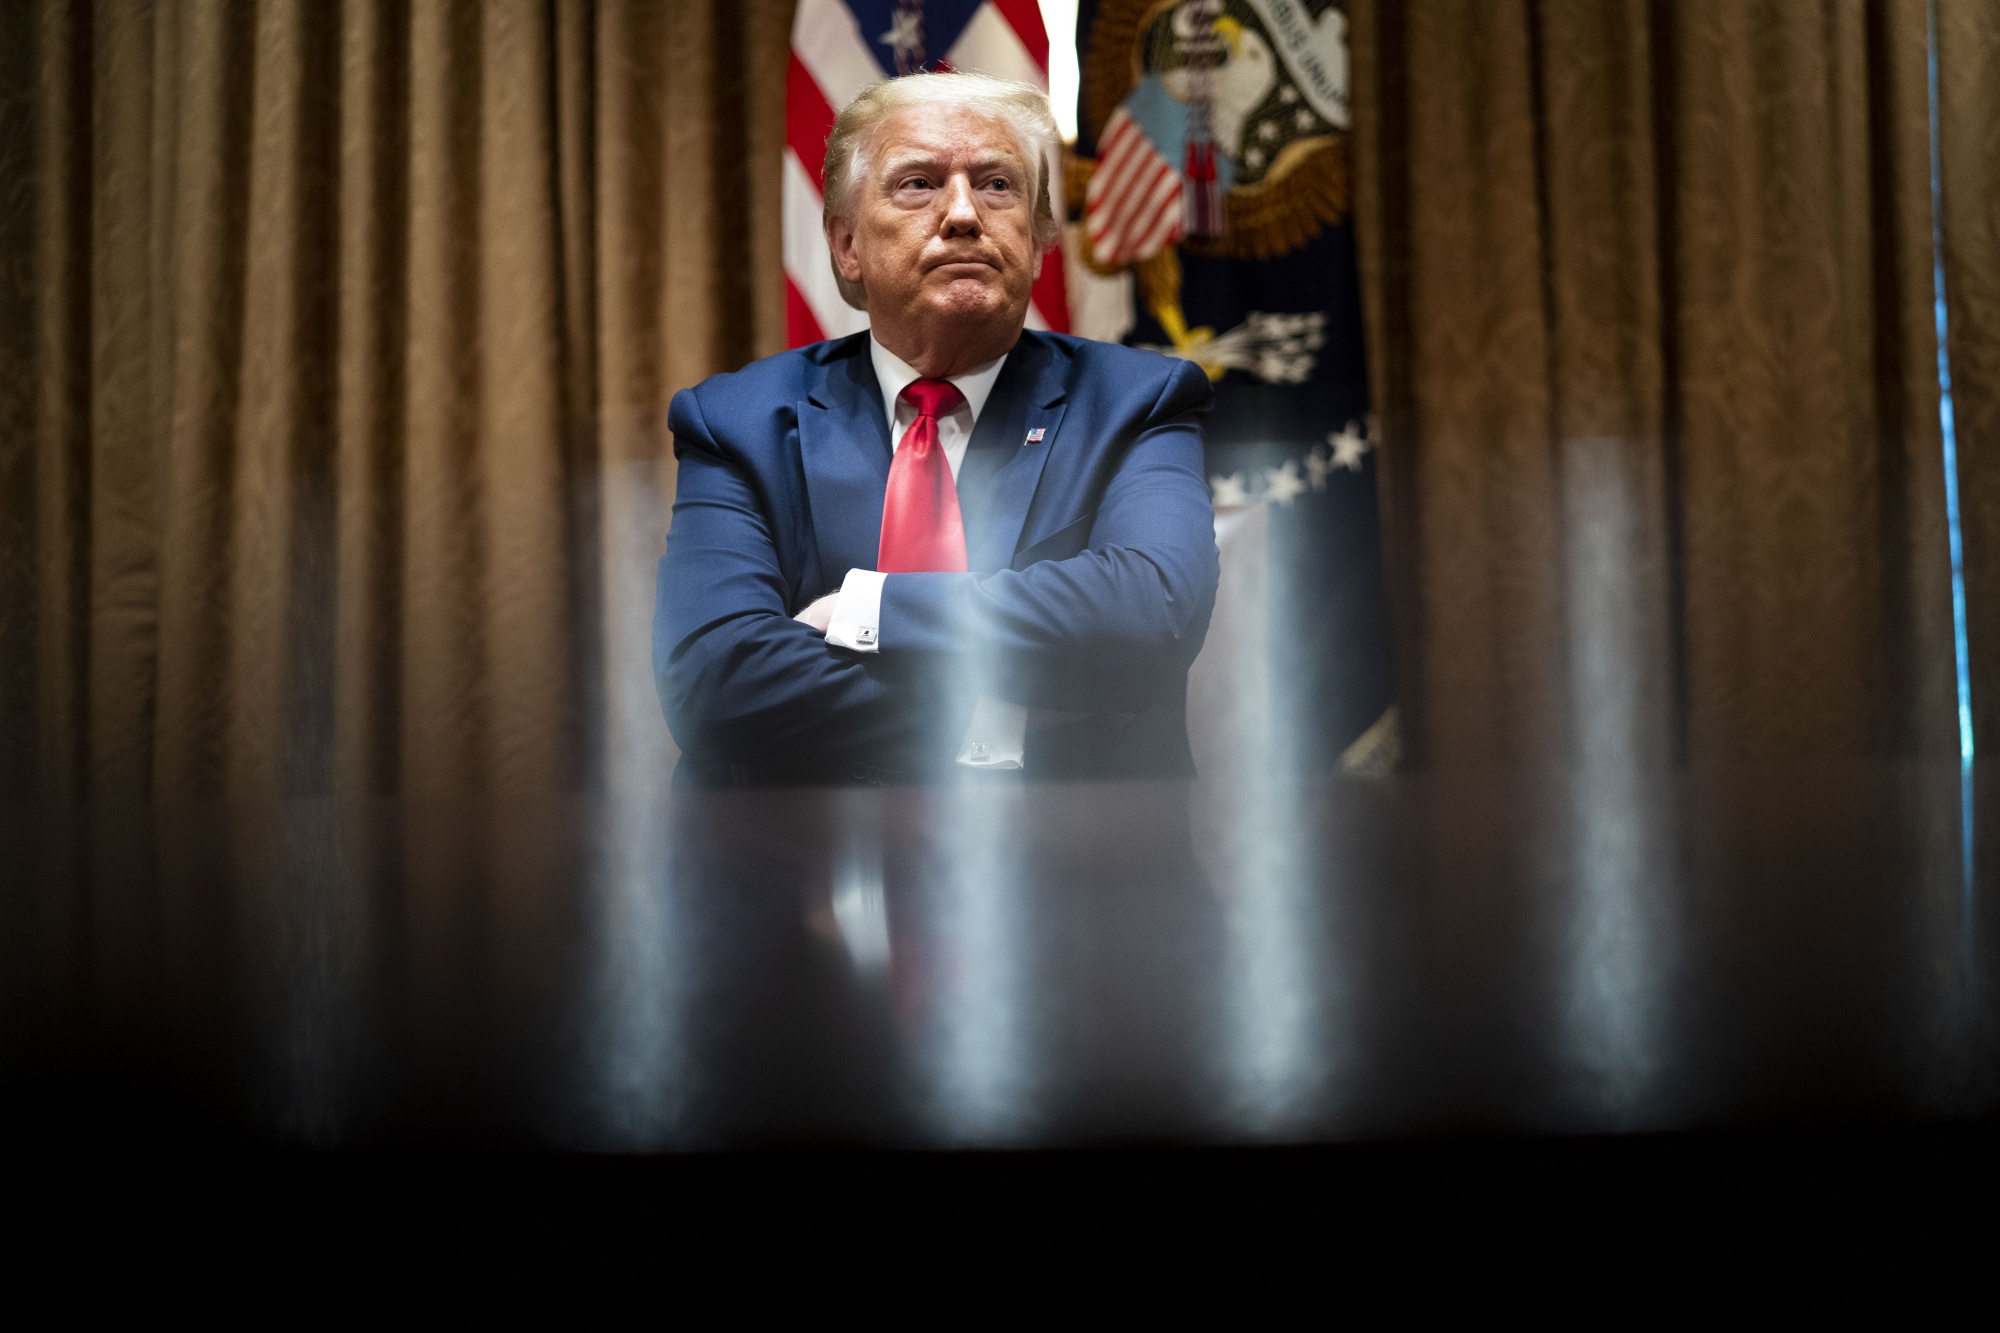 U.S. President Donald Trump sits during a meeting with African-American supporters at the White House on June 10.